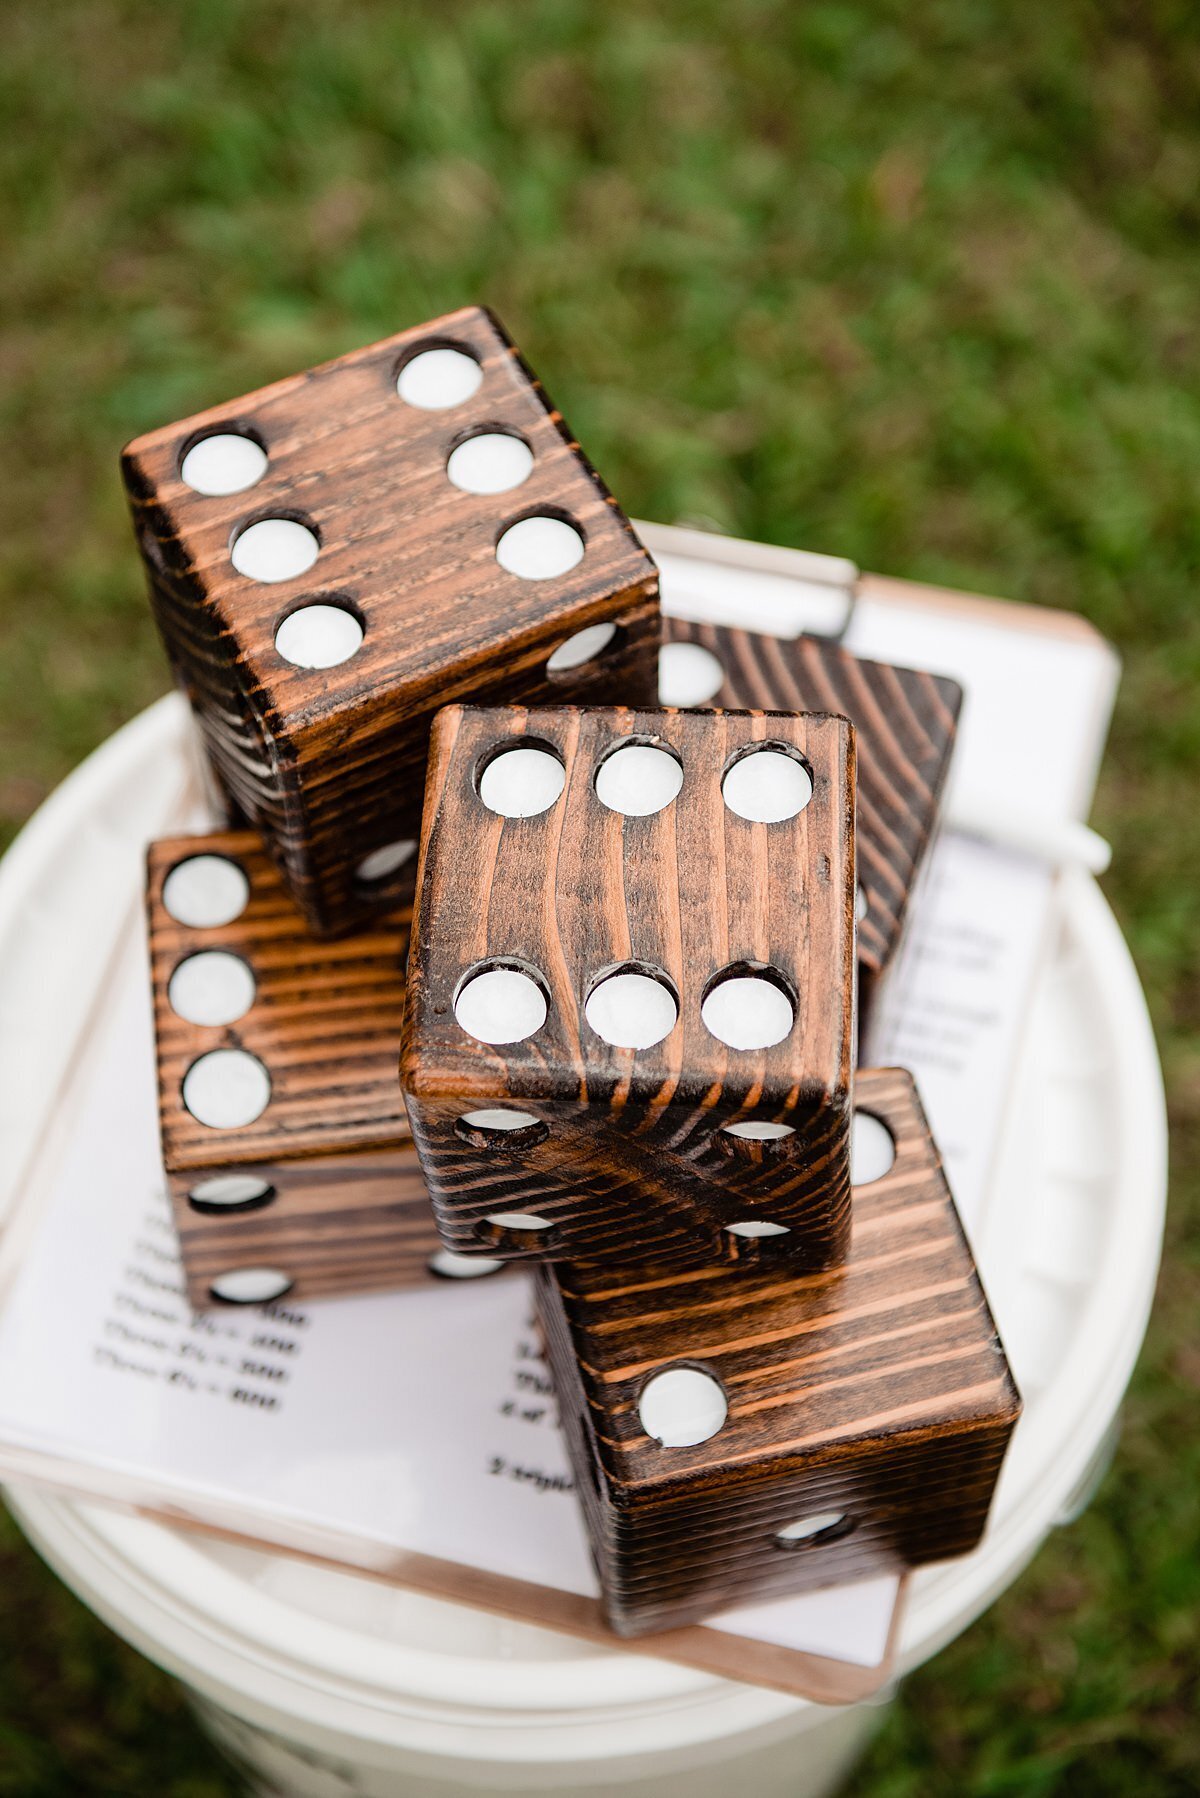 Giant Yahtzee wedding lawn game with large brown wooden dice.